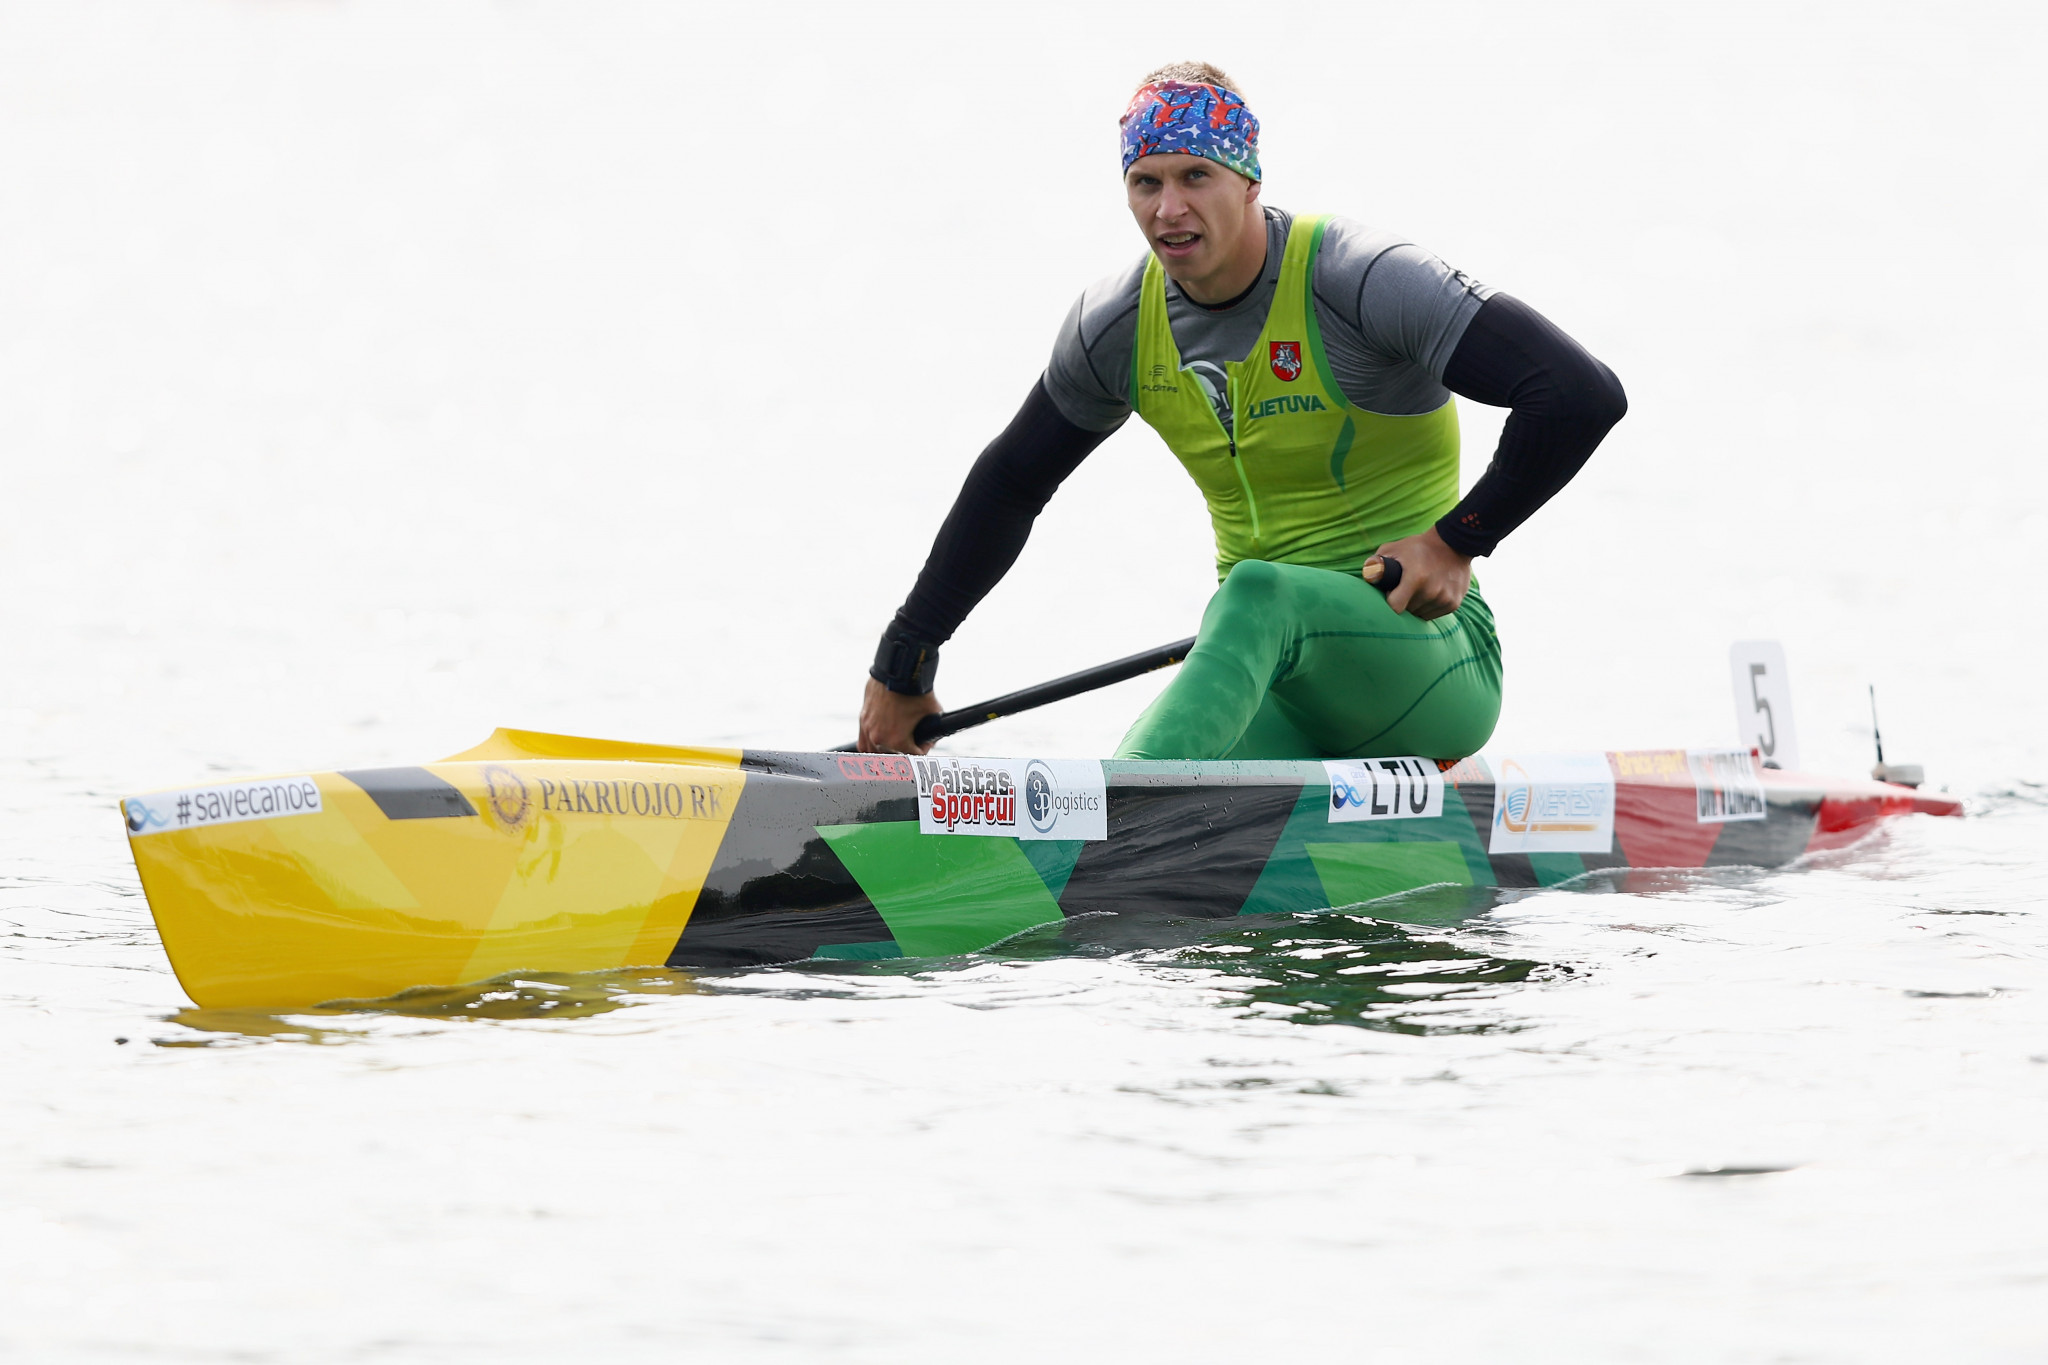 Vadim Korobov was among the winners of the heats at the Canoe Sprint Global Olympic qualifier in Barnaul ©Getty Images